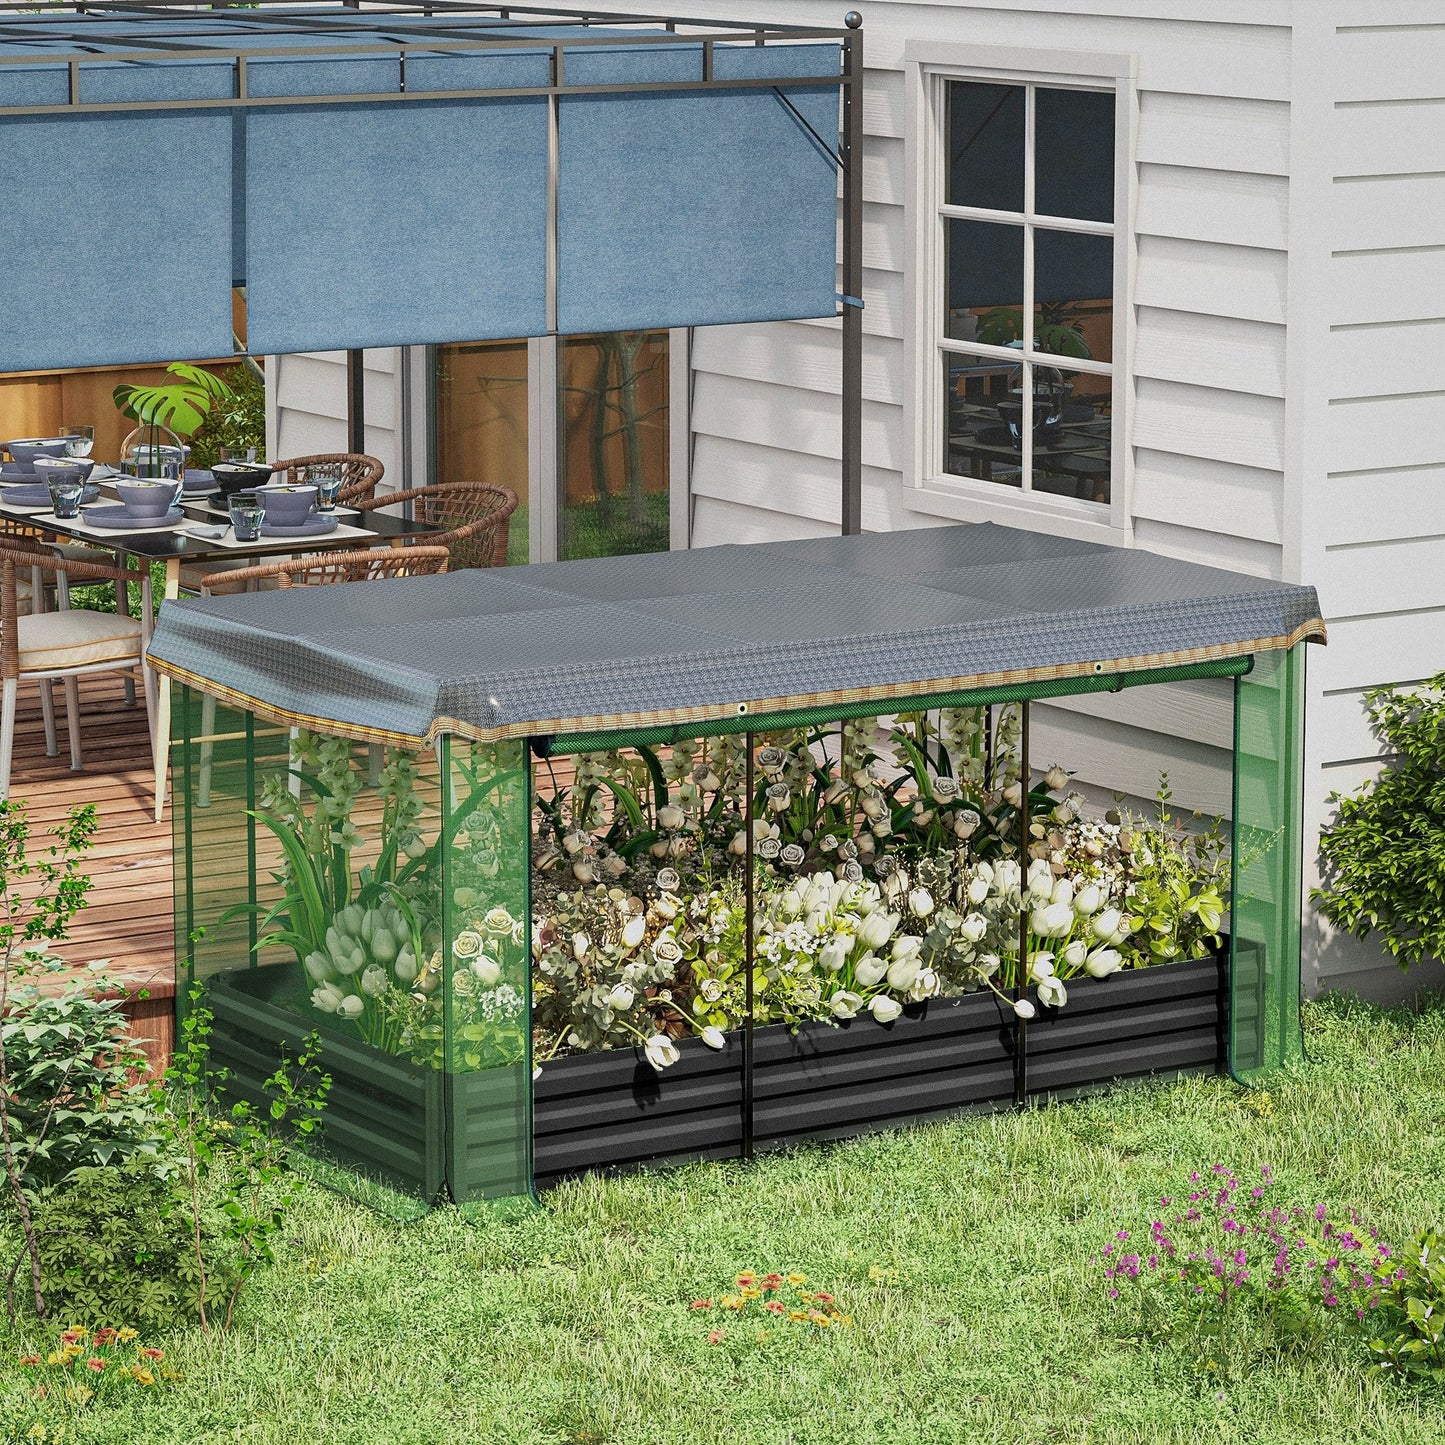 Galvanized Steel Planter Box with Crop Cage and Shade Cloth, Raised Garden Bed for Flowers, Vegs and Herbs at Gallery Canada